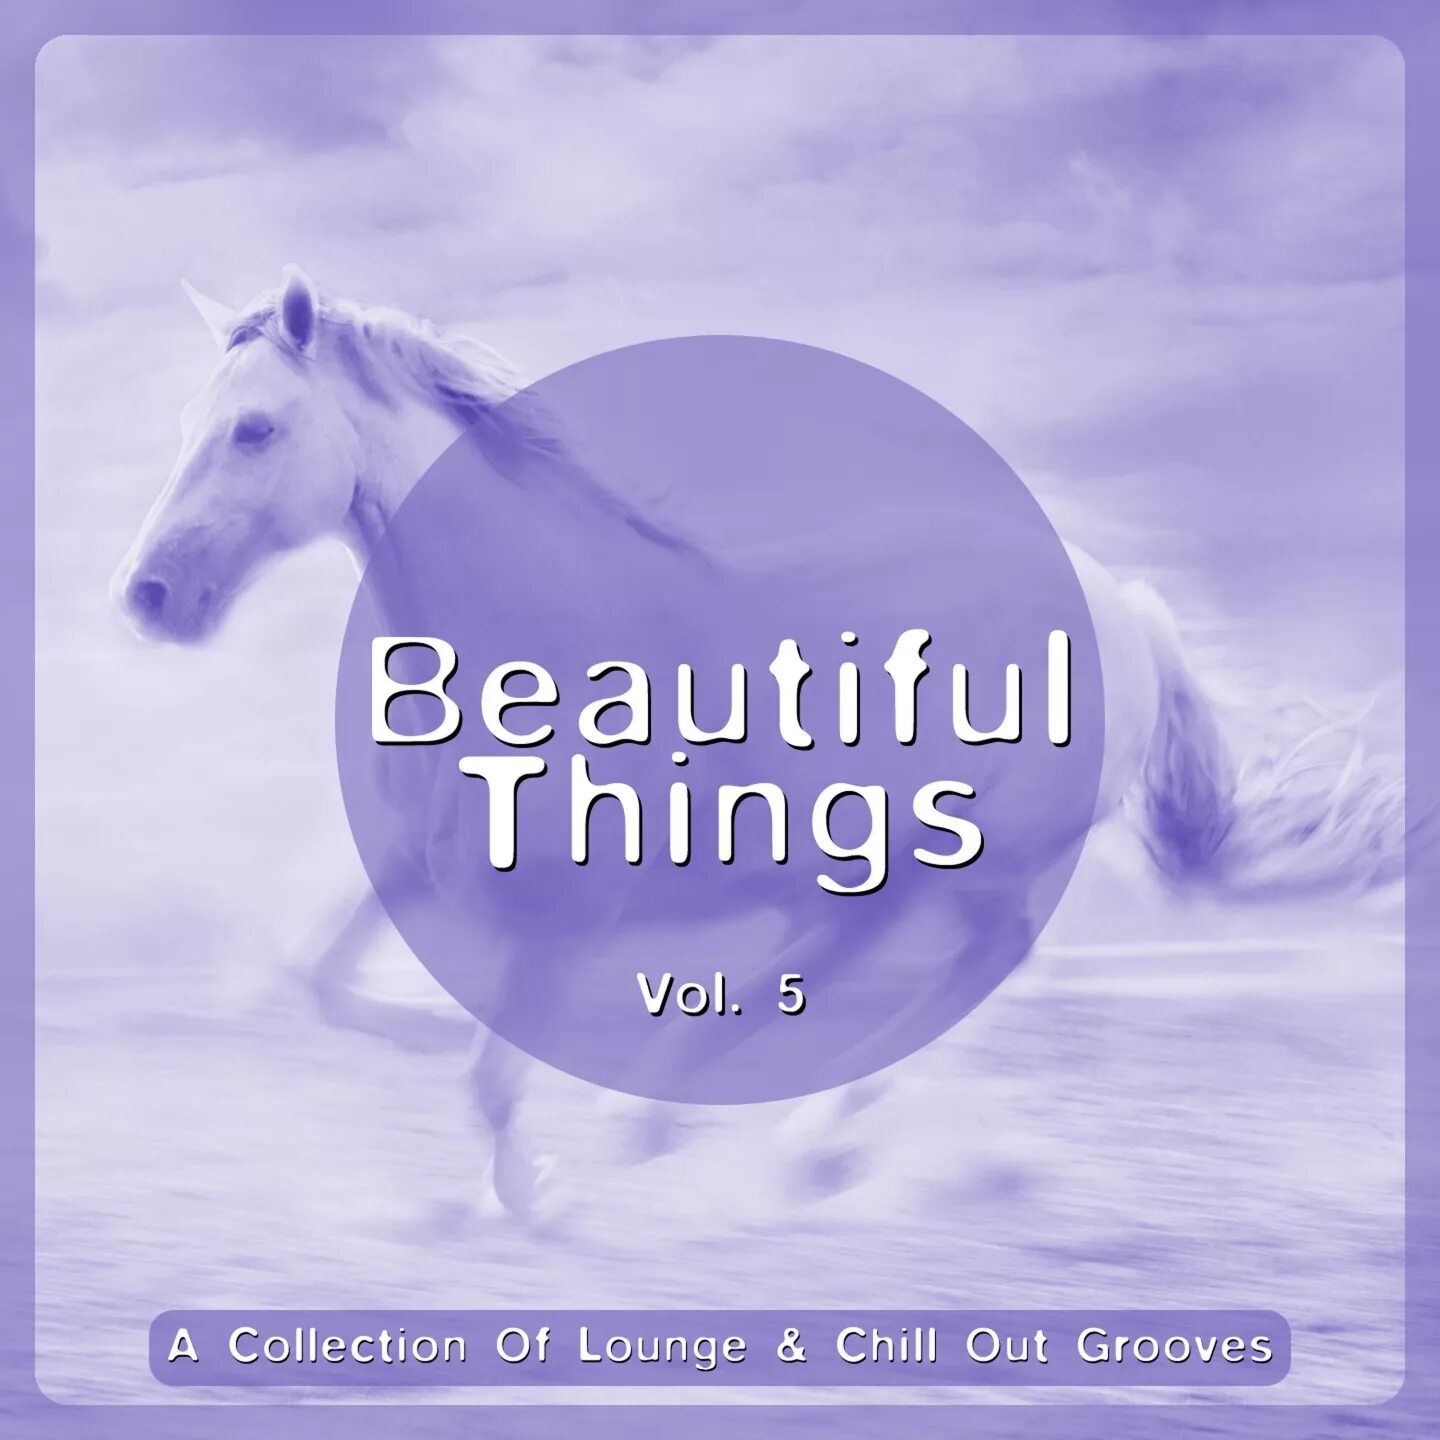 Сборник Chill out на CD. Andain beautiful things. Альбом Chill out - (Gold collection) - 2010г. Alma Chill out альбомы. Beautiful things mp3